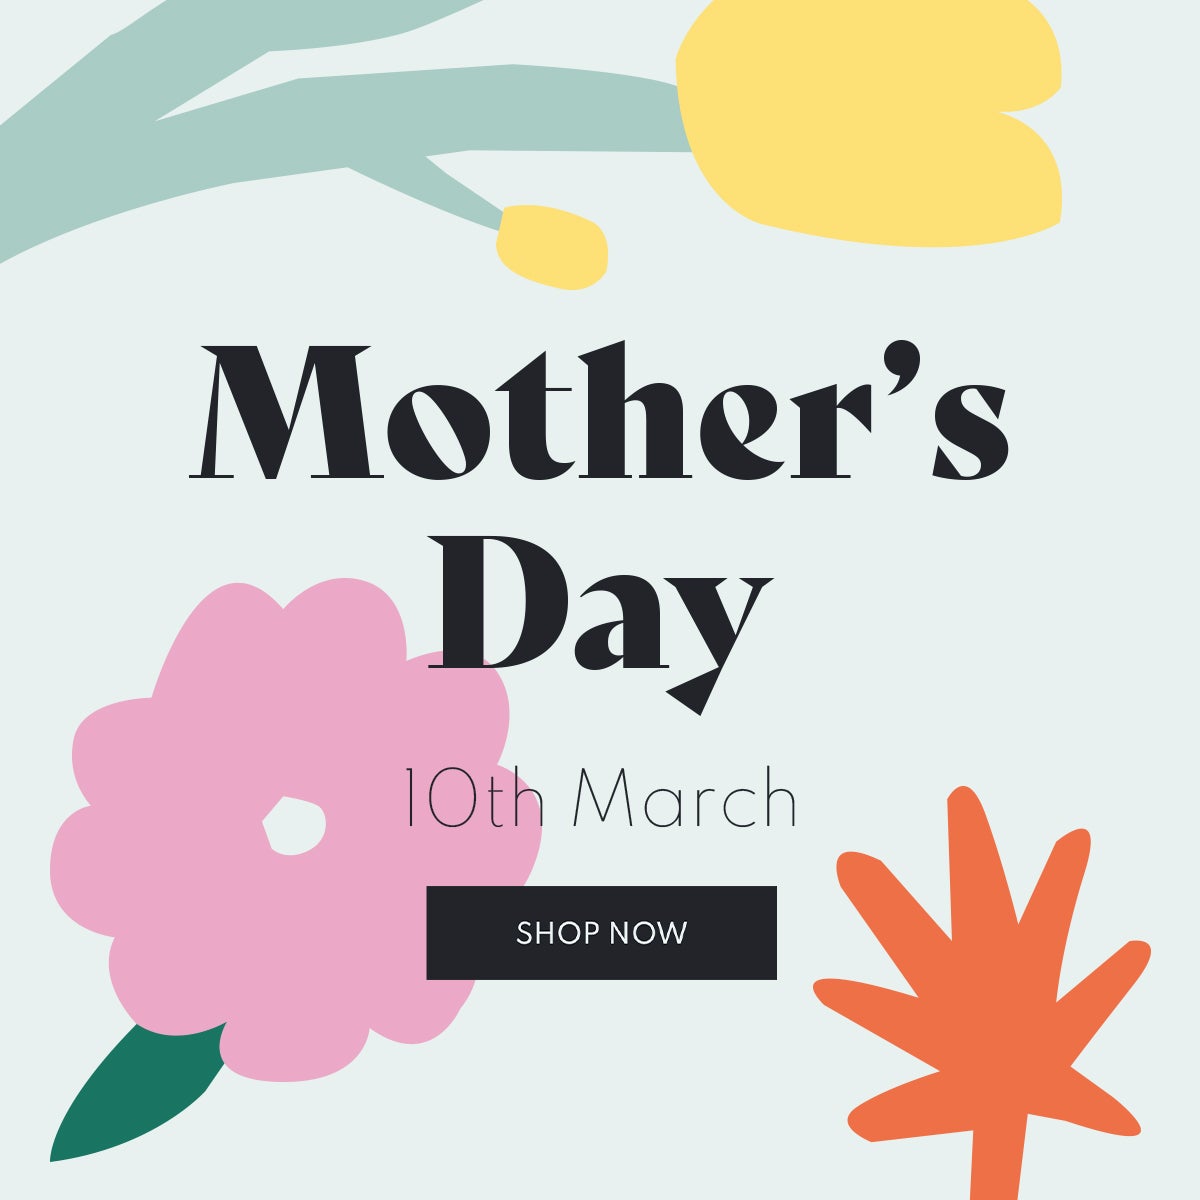 Mother's Day 10th March Shop Now